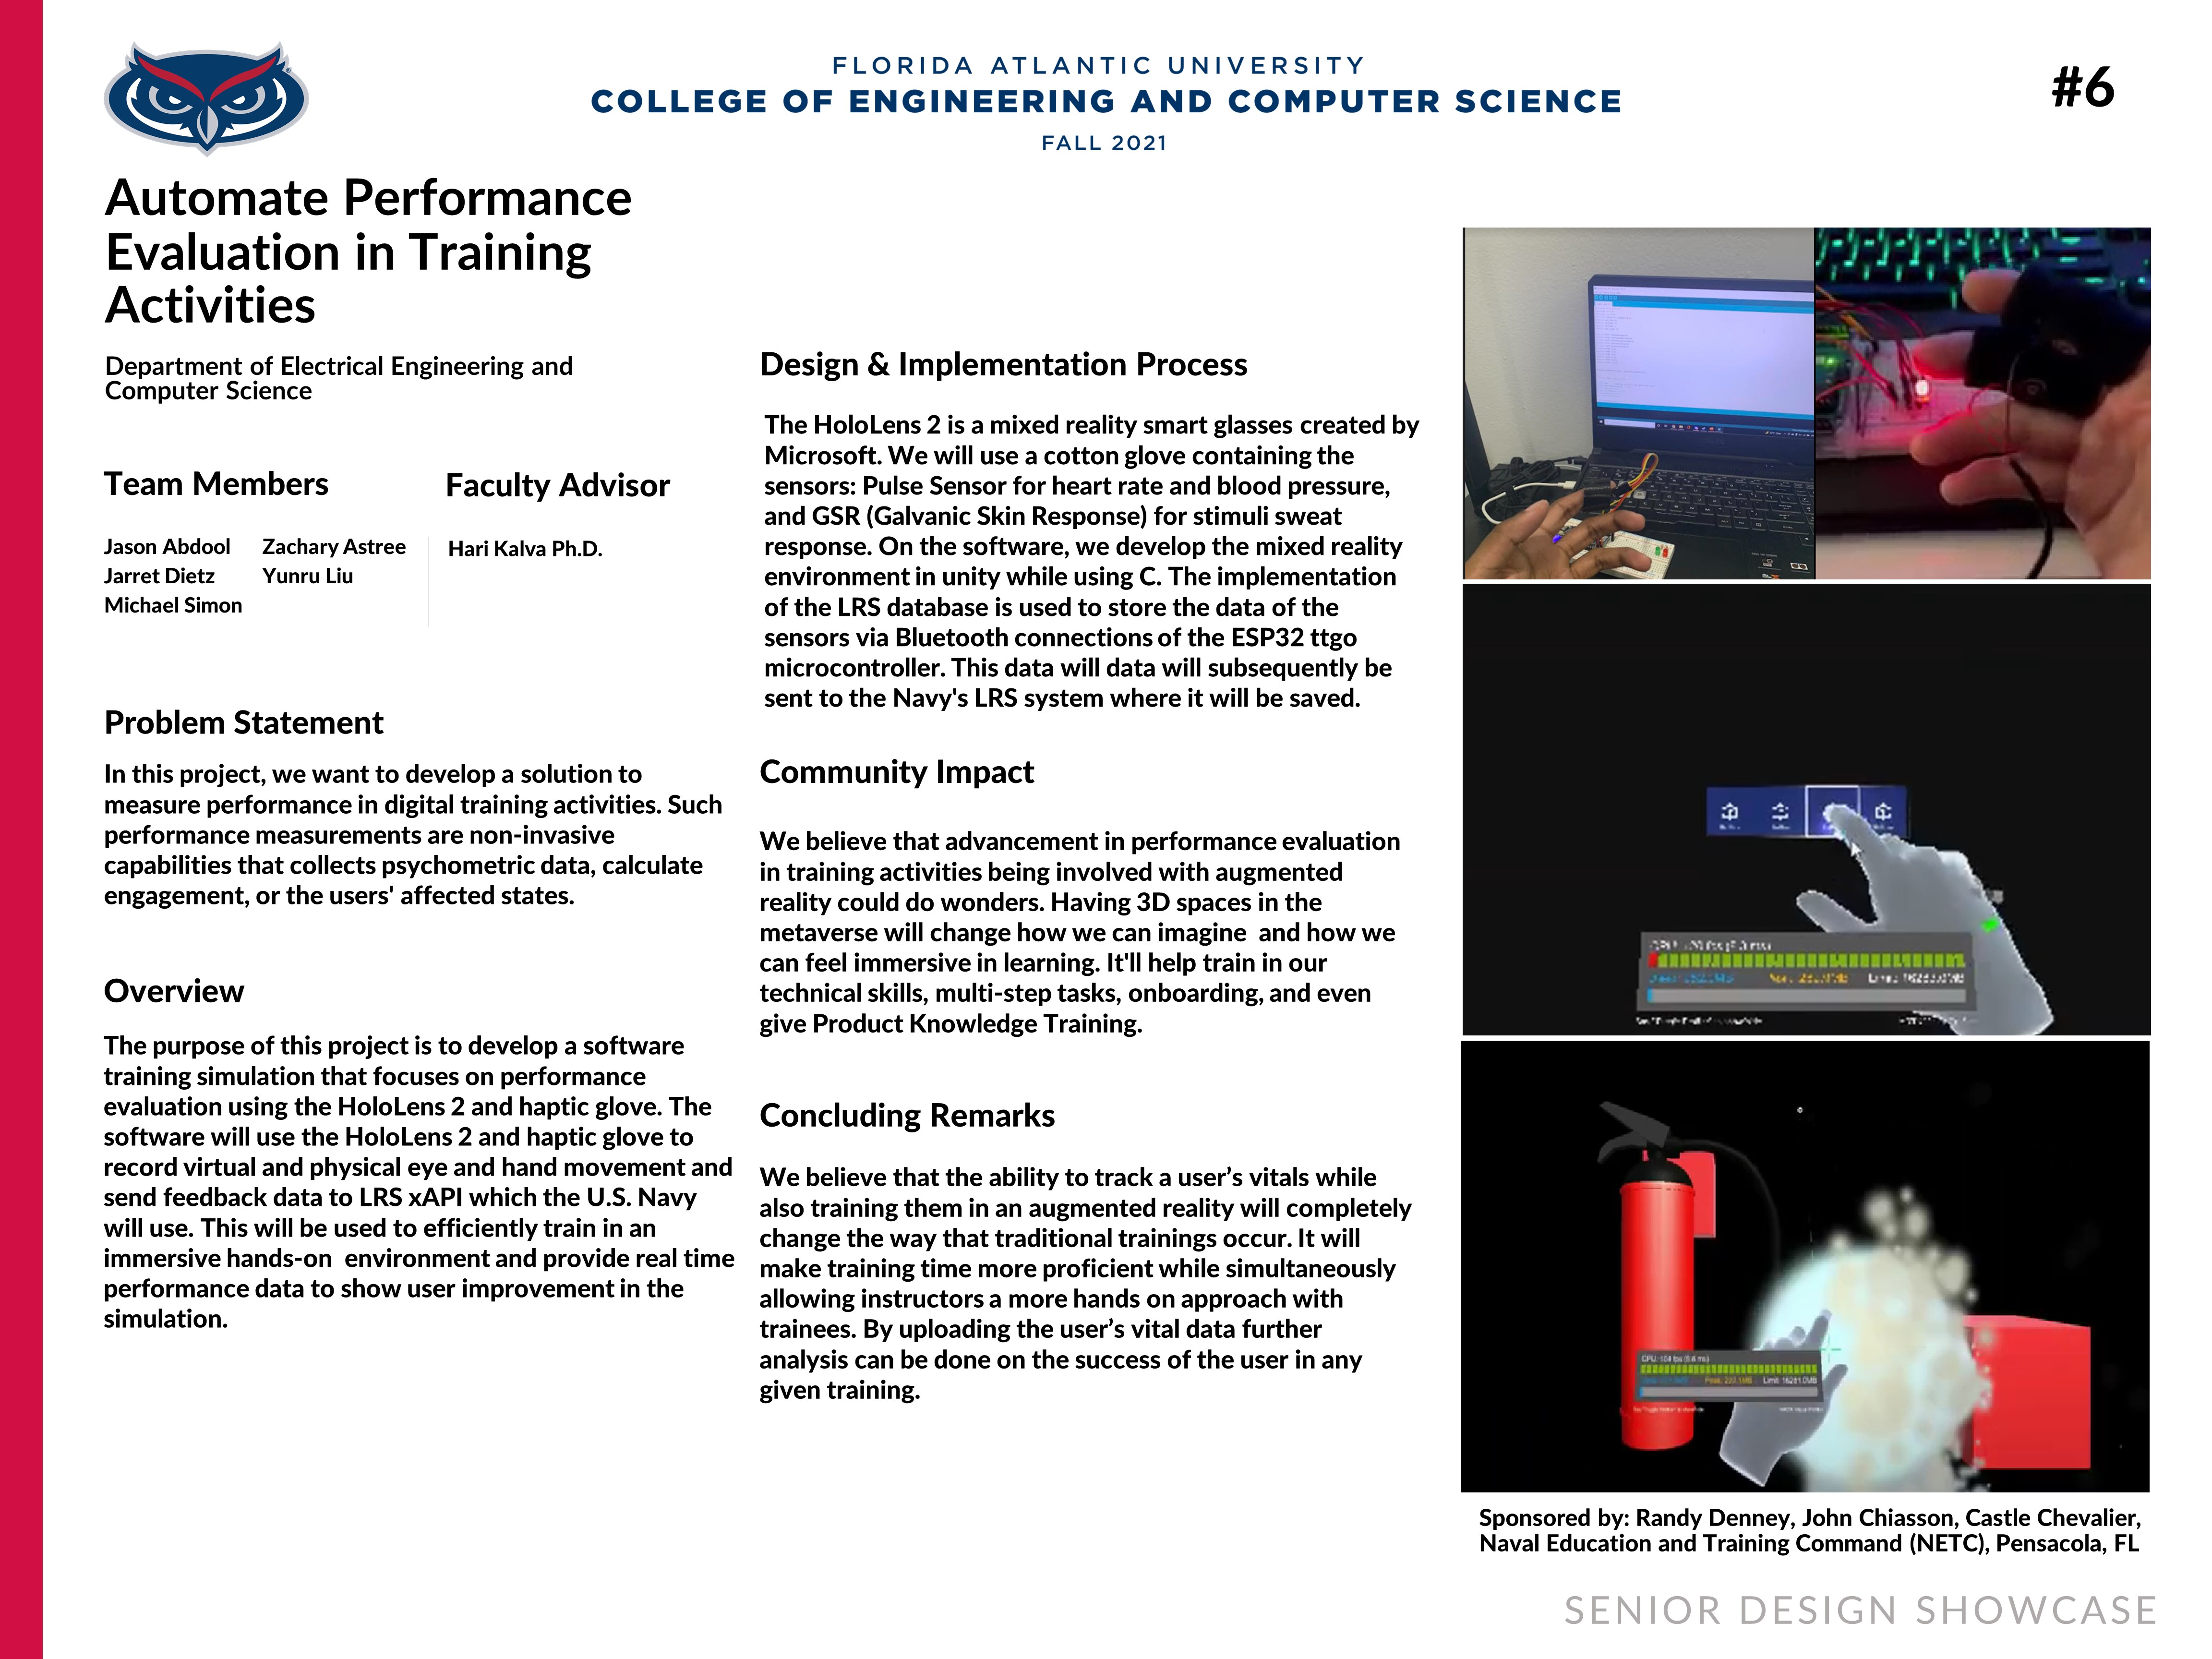 Automated Performance Evaluation in Training Activities